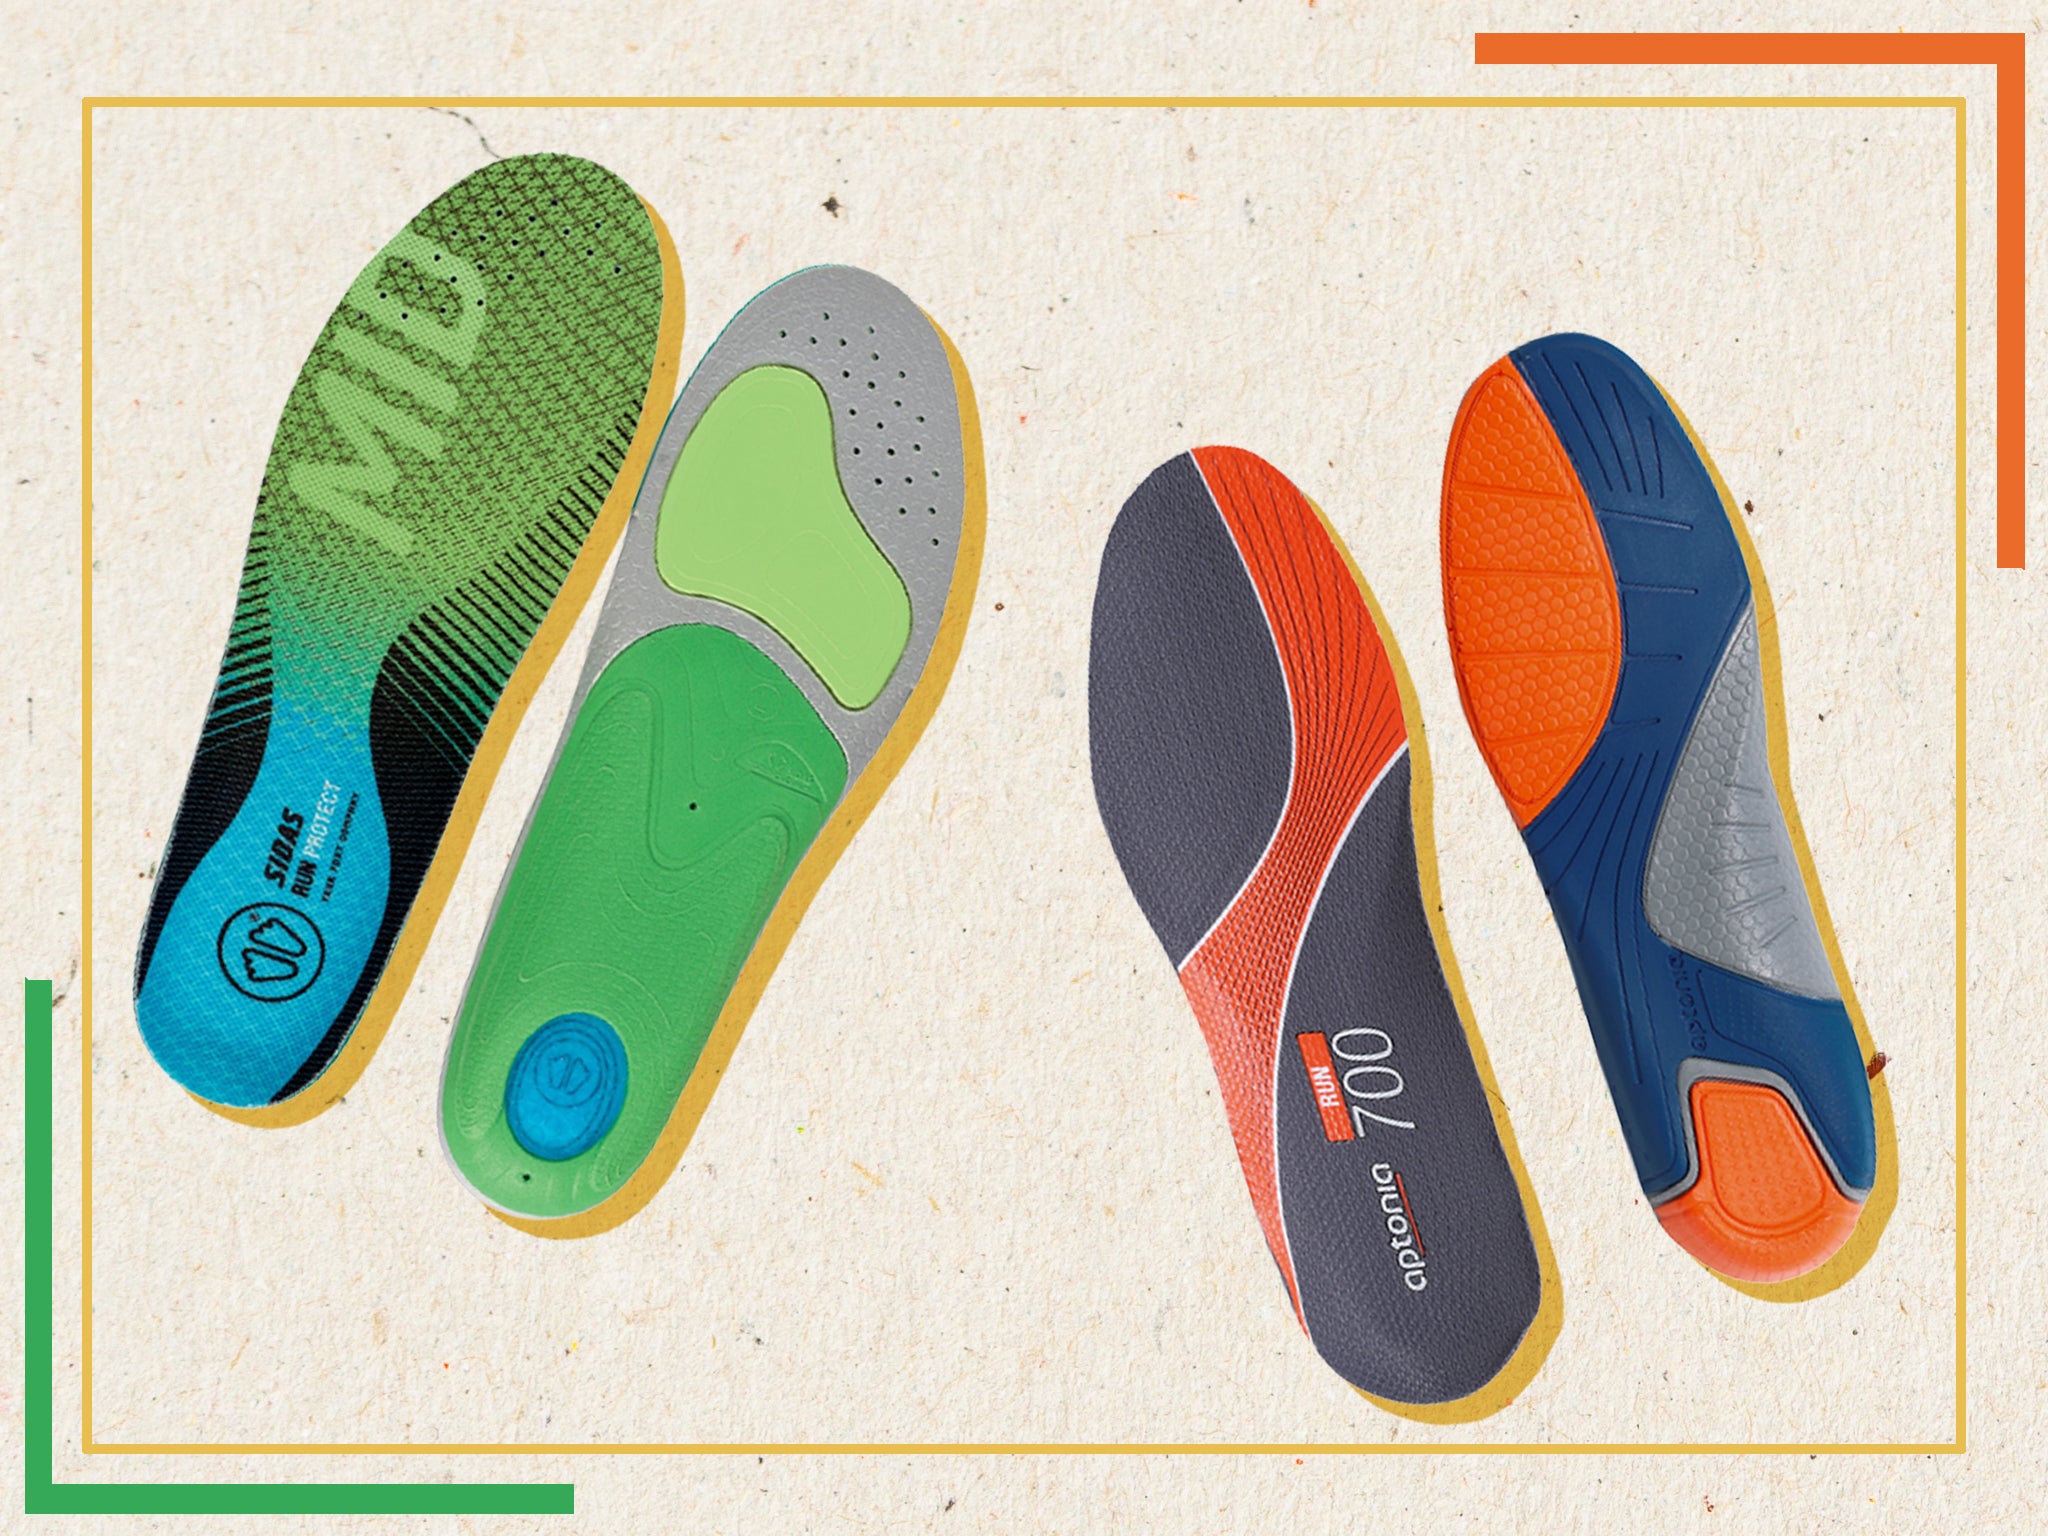 We put these insoles through their paces on a range of different routes